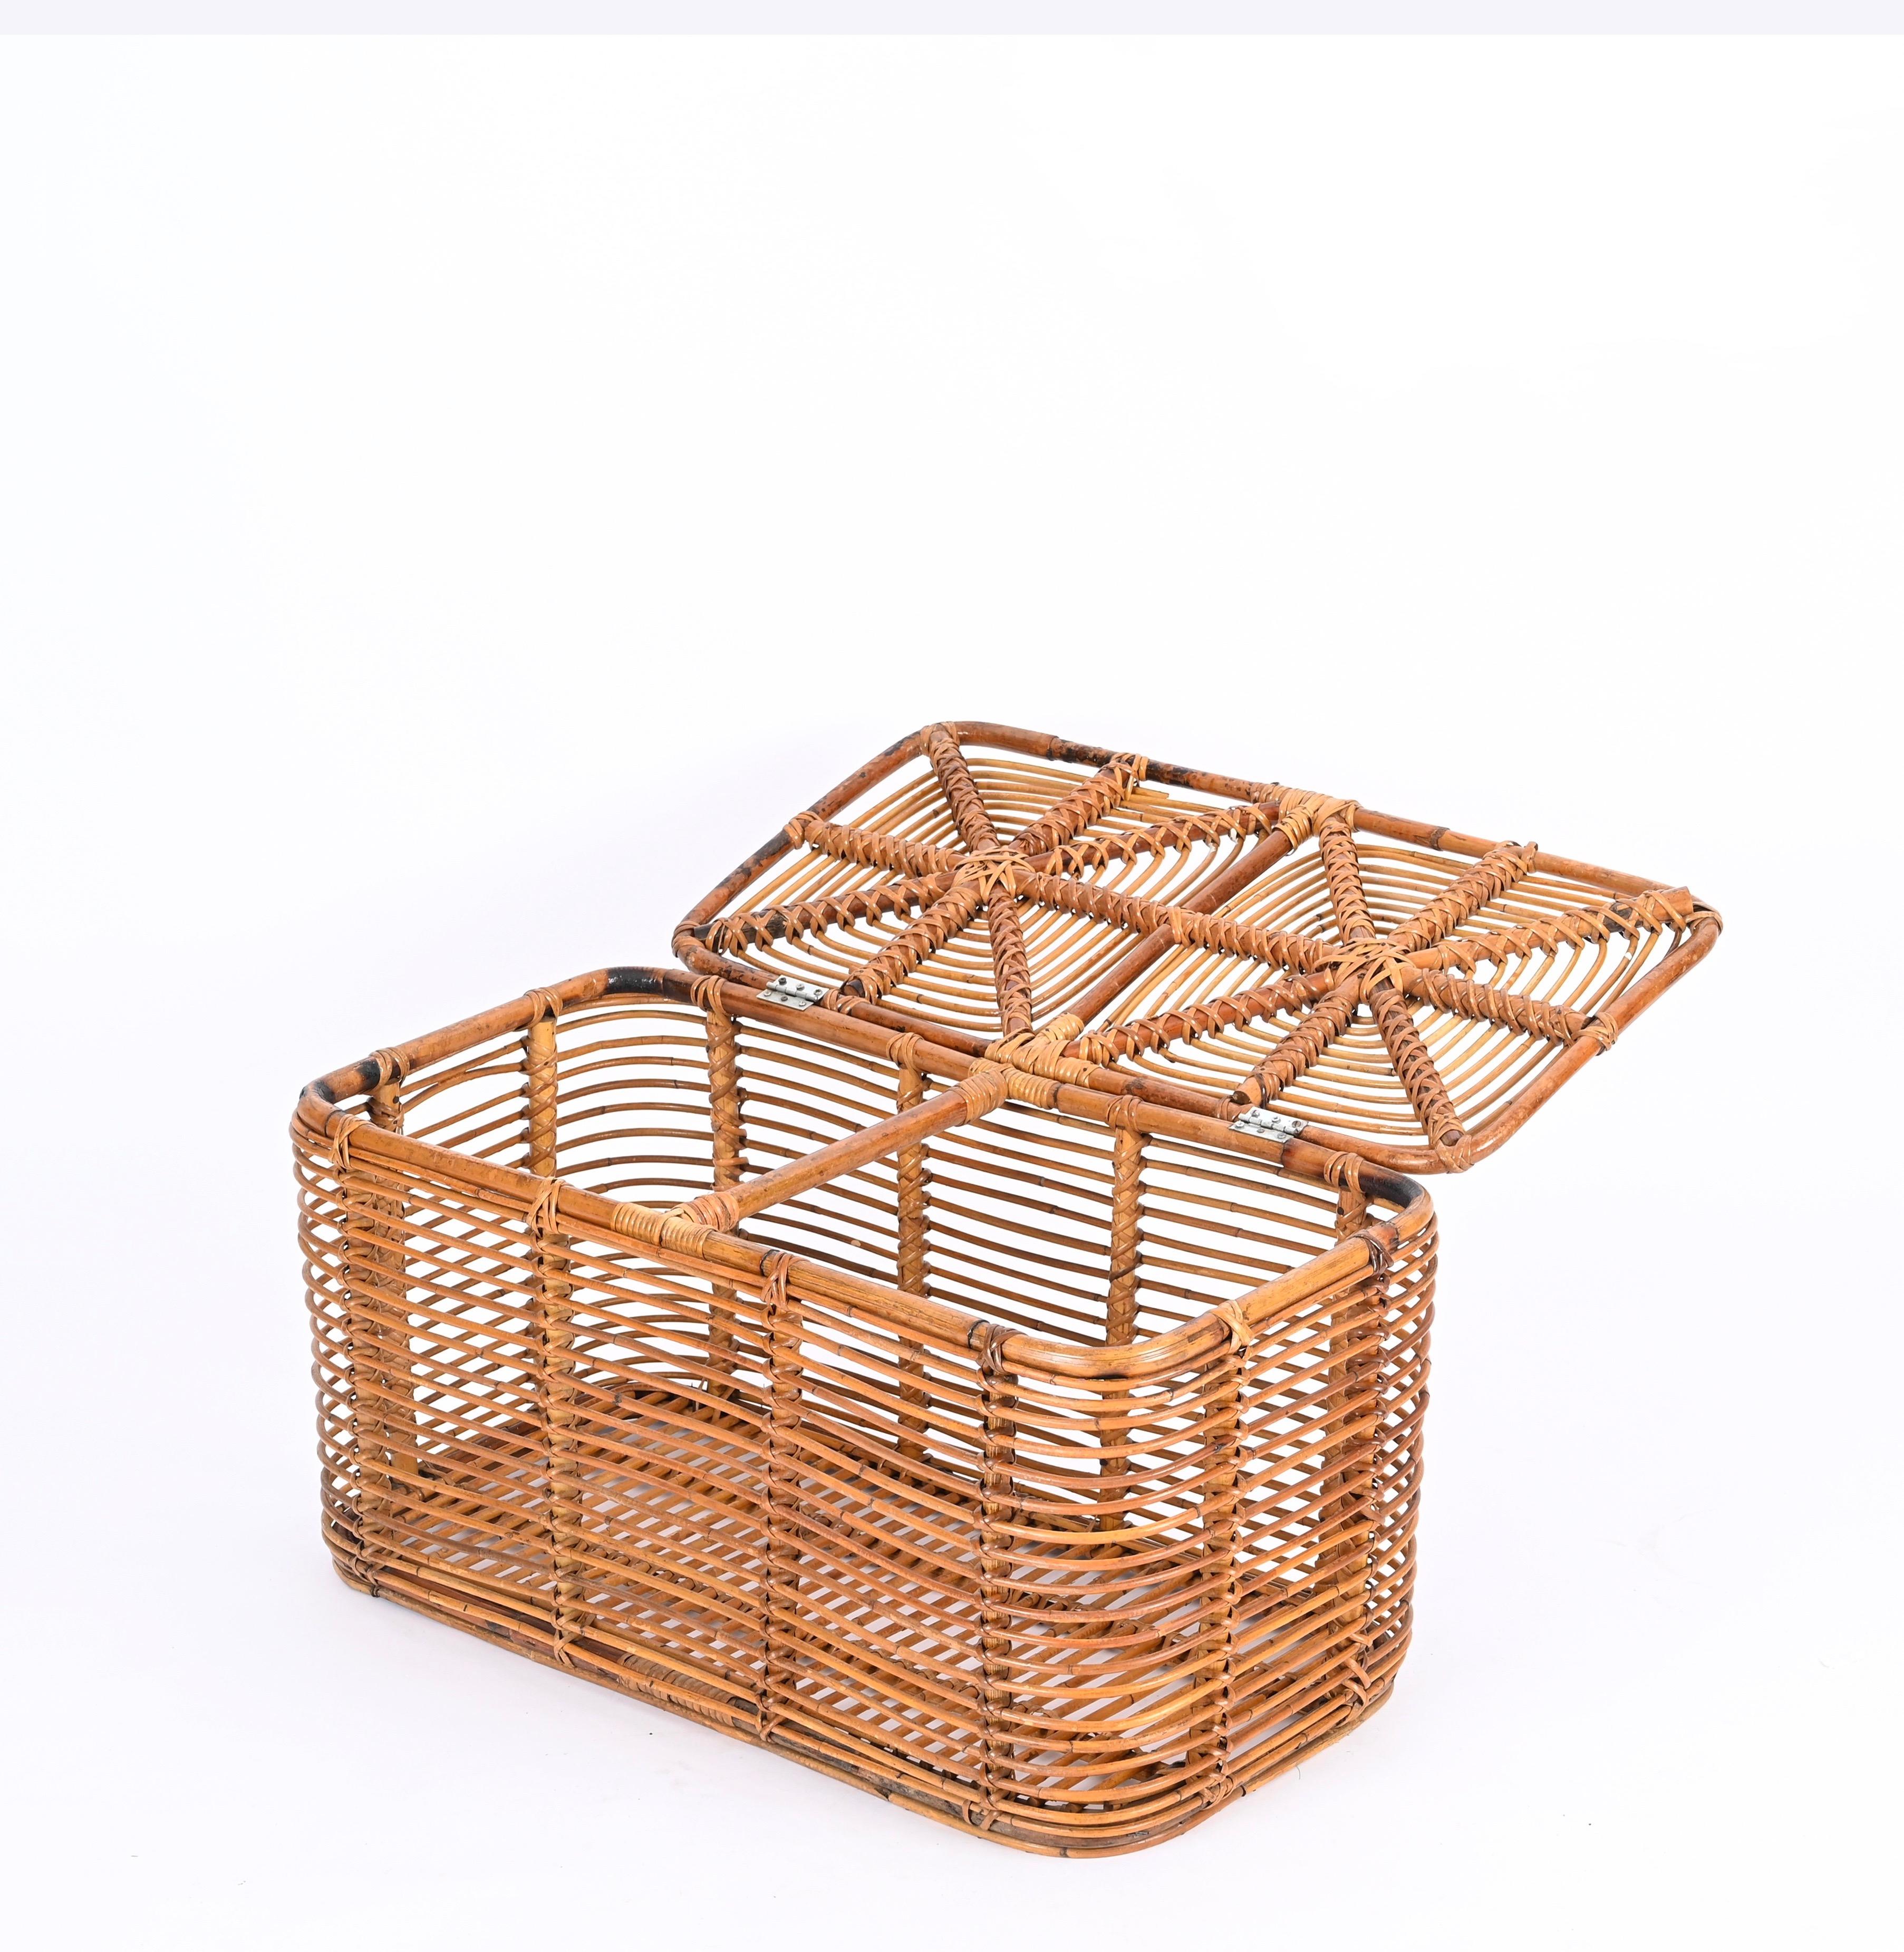 Hand-Woven Midcentury French Riviera Bamboo and Woven Rattan Italian Basket, 1960s For Sale